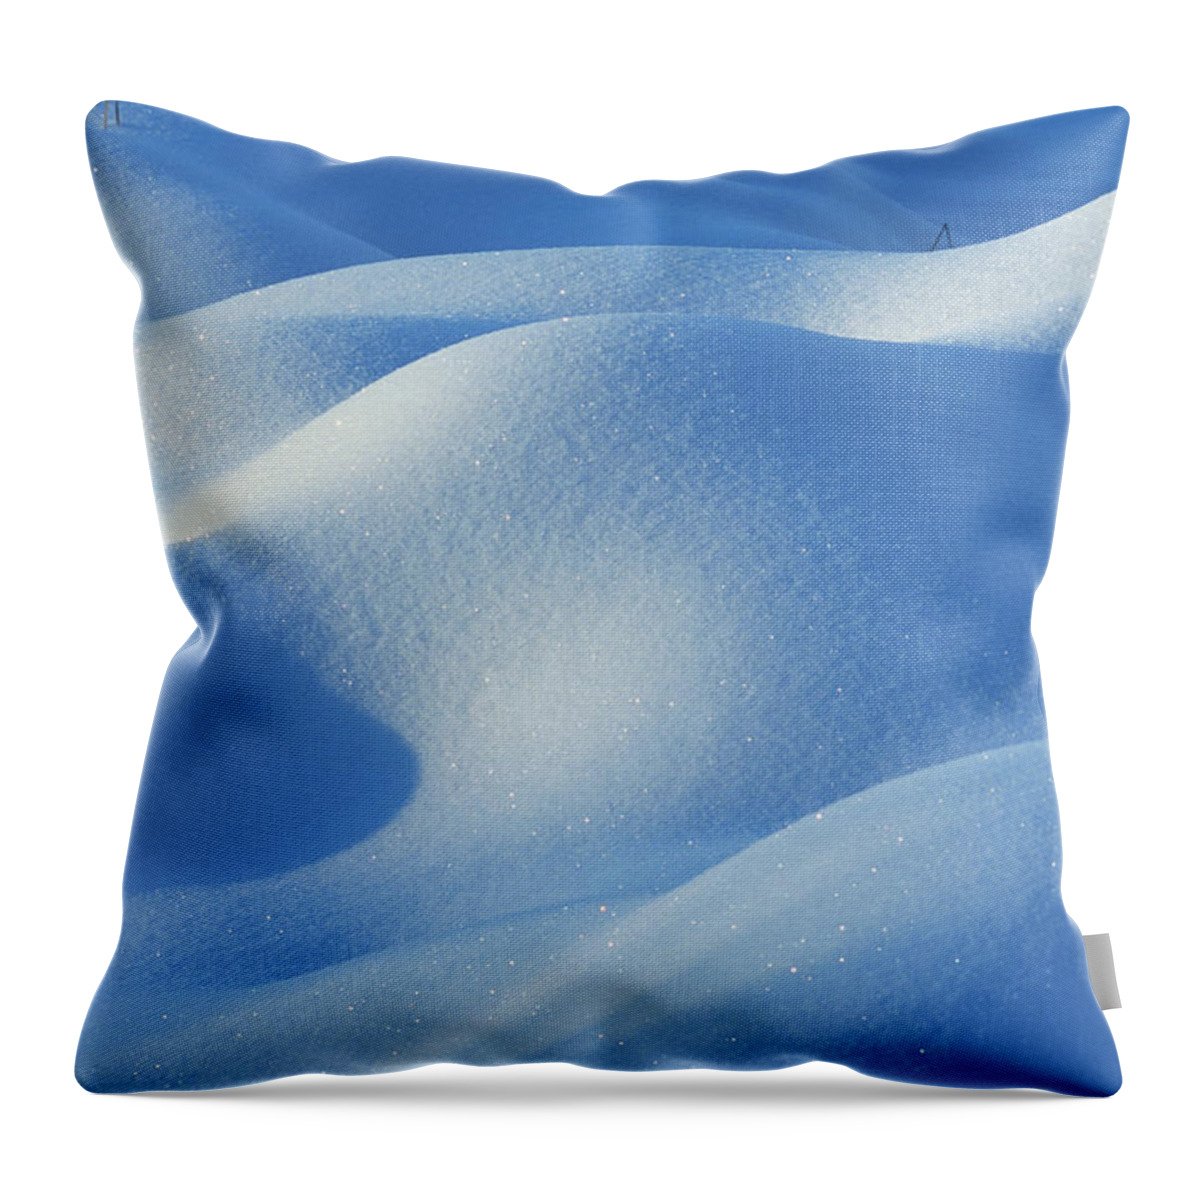 Snow Throw Pillow featuring the photograph Snow Detail On Tundra Pond, Alaska, Usa by Kevin Schafer